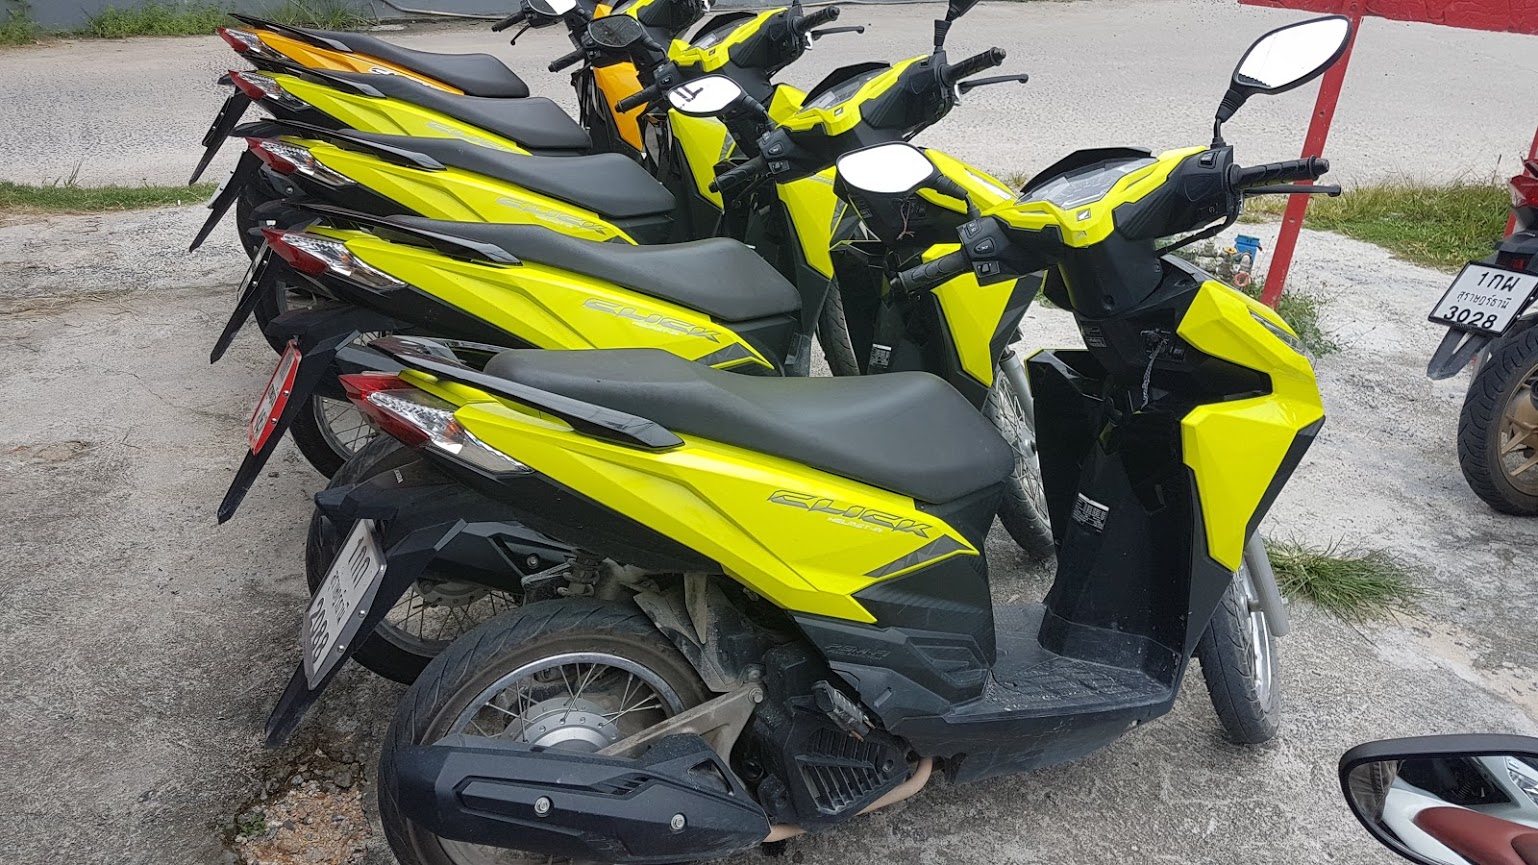 Scooters for Sale